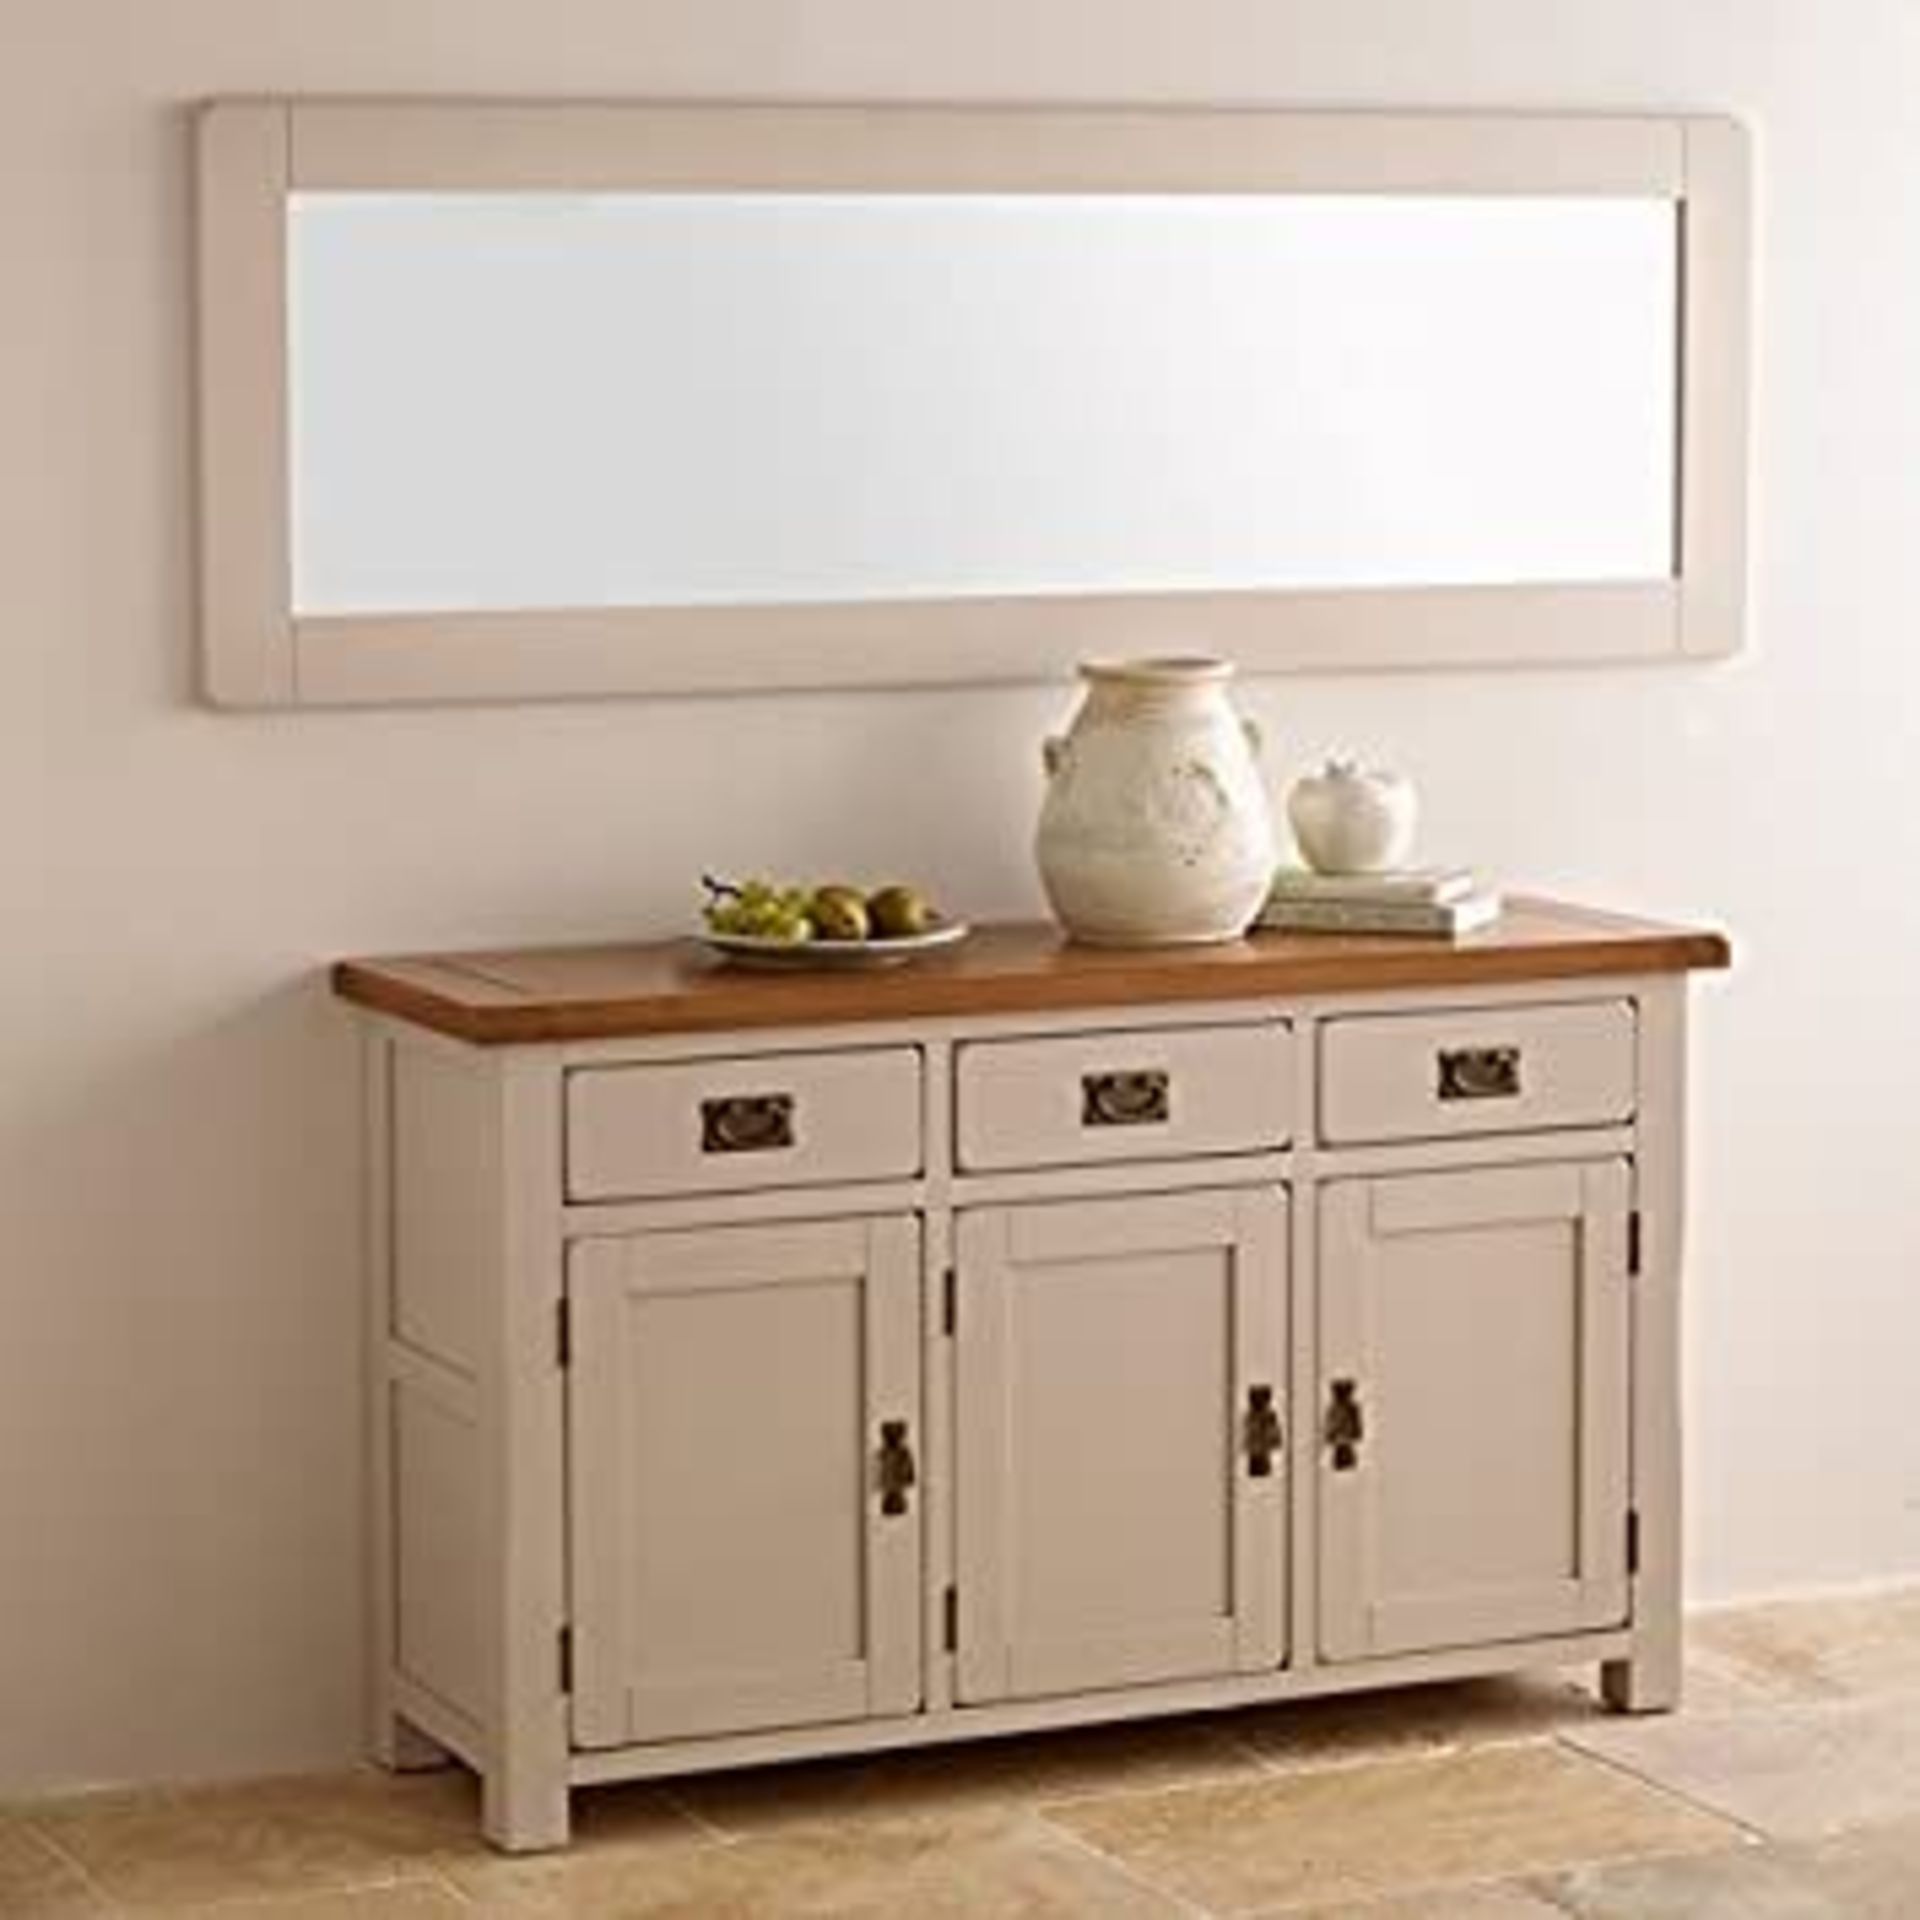 NEW BOXED KEMBLE RUSTIC SOLID OAK & PAINTED WALL MIRROR. 1800x600MM. RRP £300 EACH. 100% OAK, REAL - Image 2 of 2